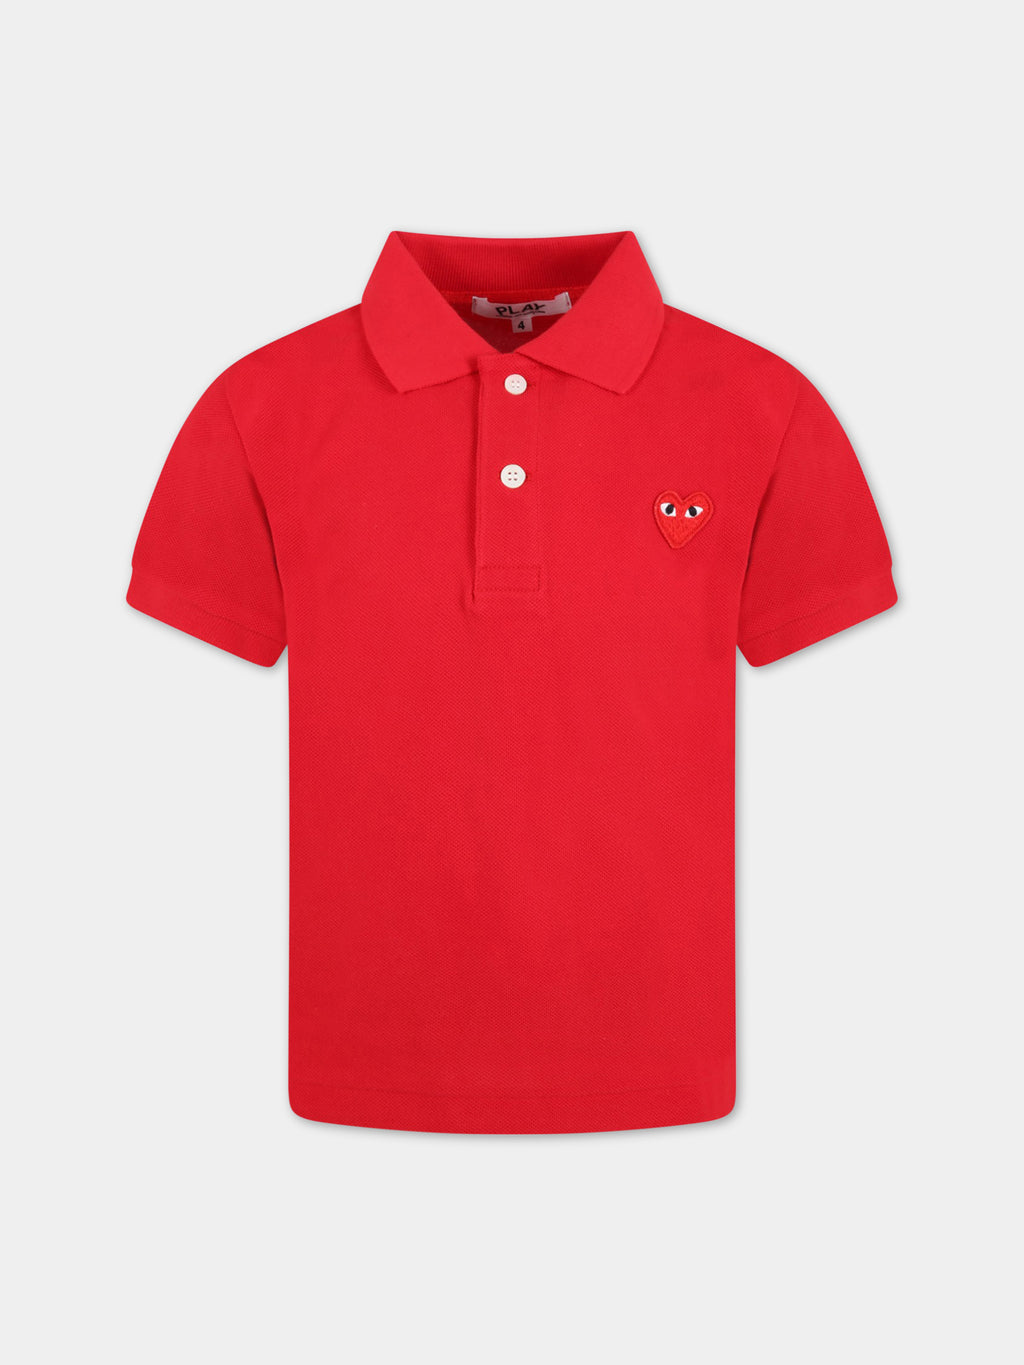 Red polo t-shirt for kids with logo